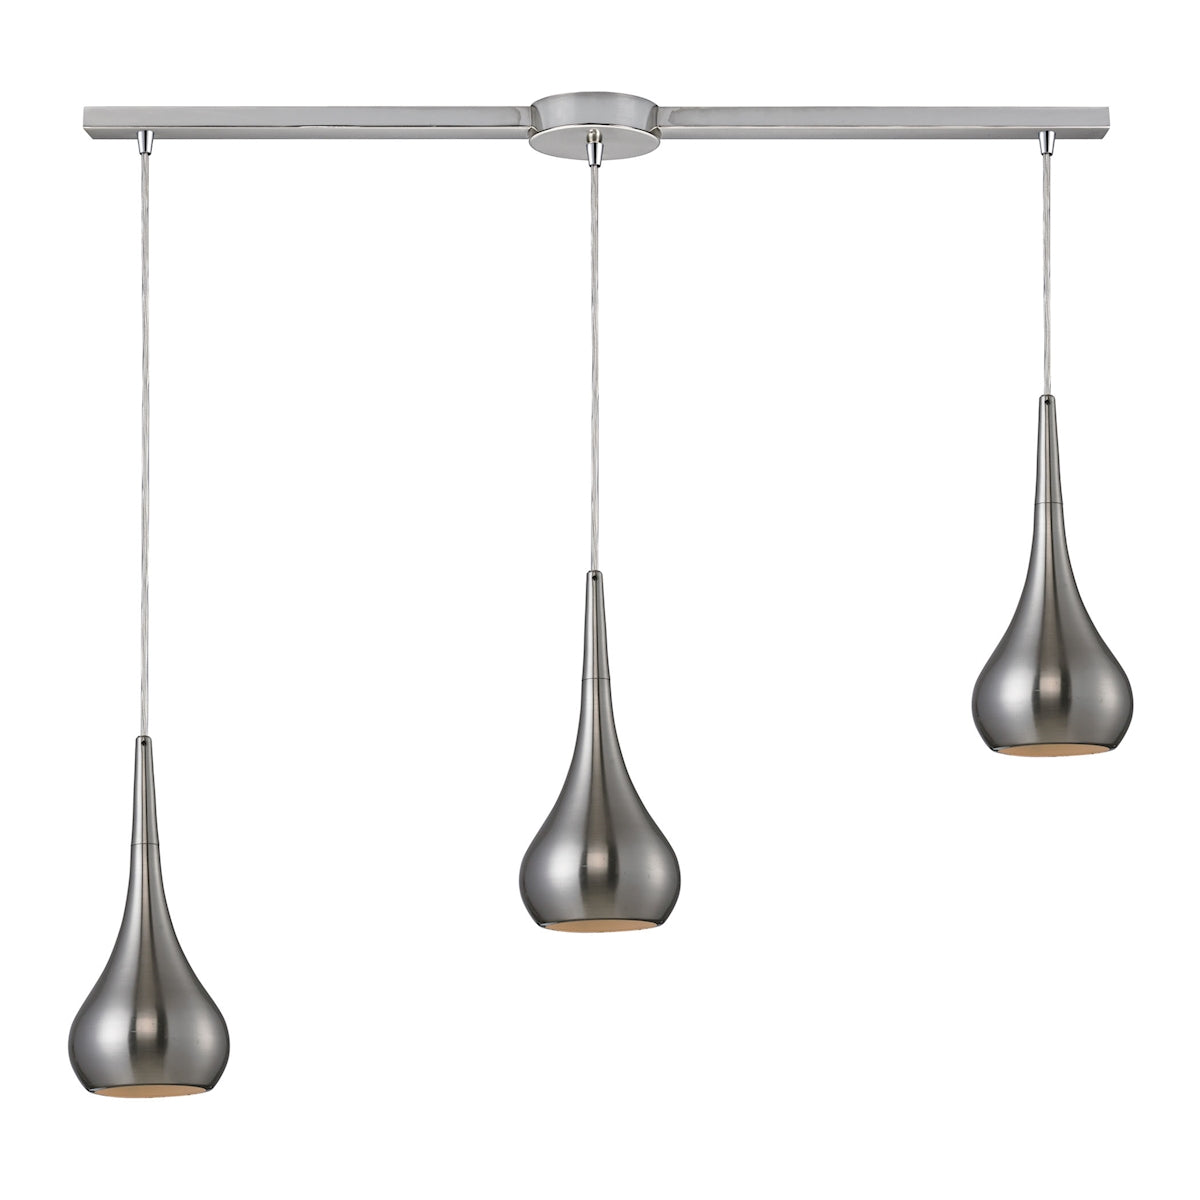 ELK Lighting 31340/3L-SN Lindsey 3-Light Linear Pendant Fixture in Satin Nickel with Satin Nickel Finished Glass